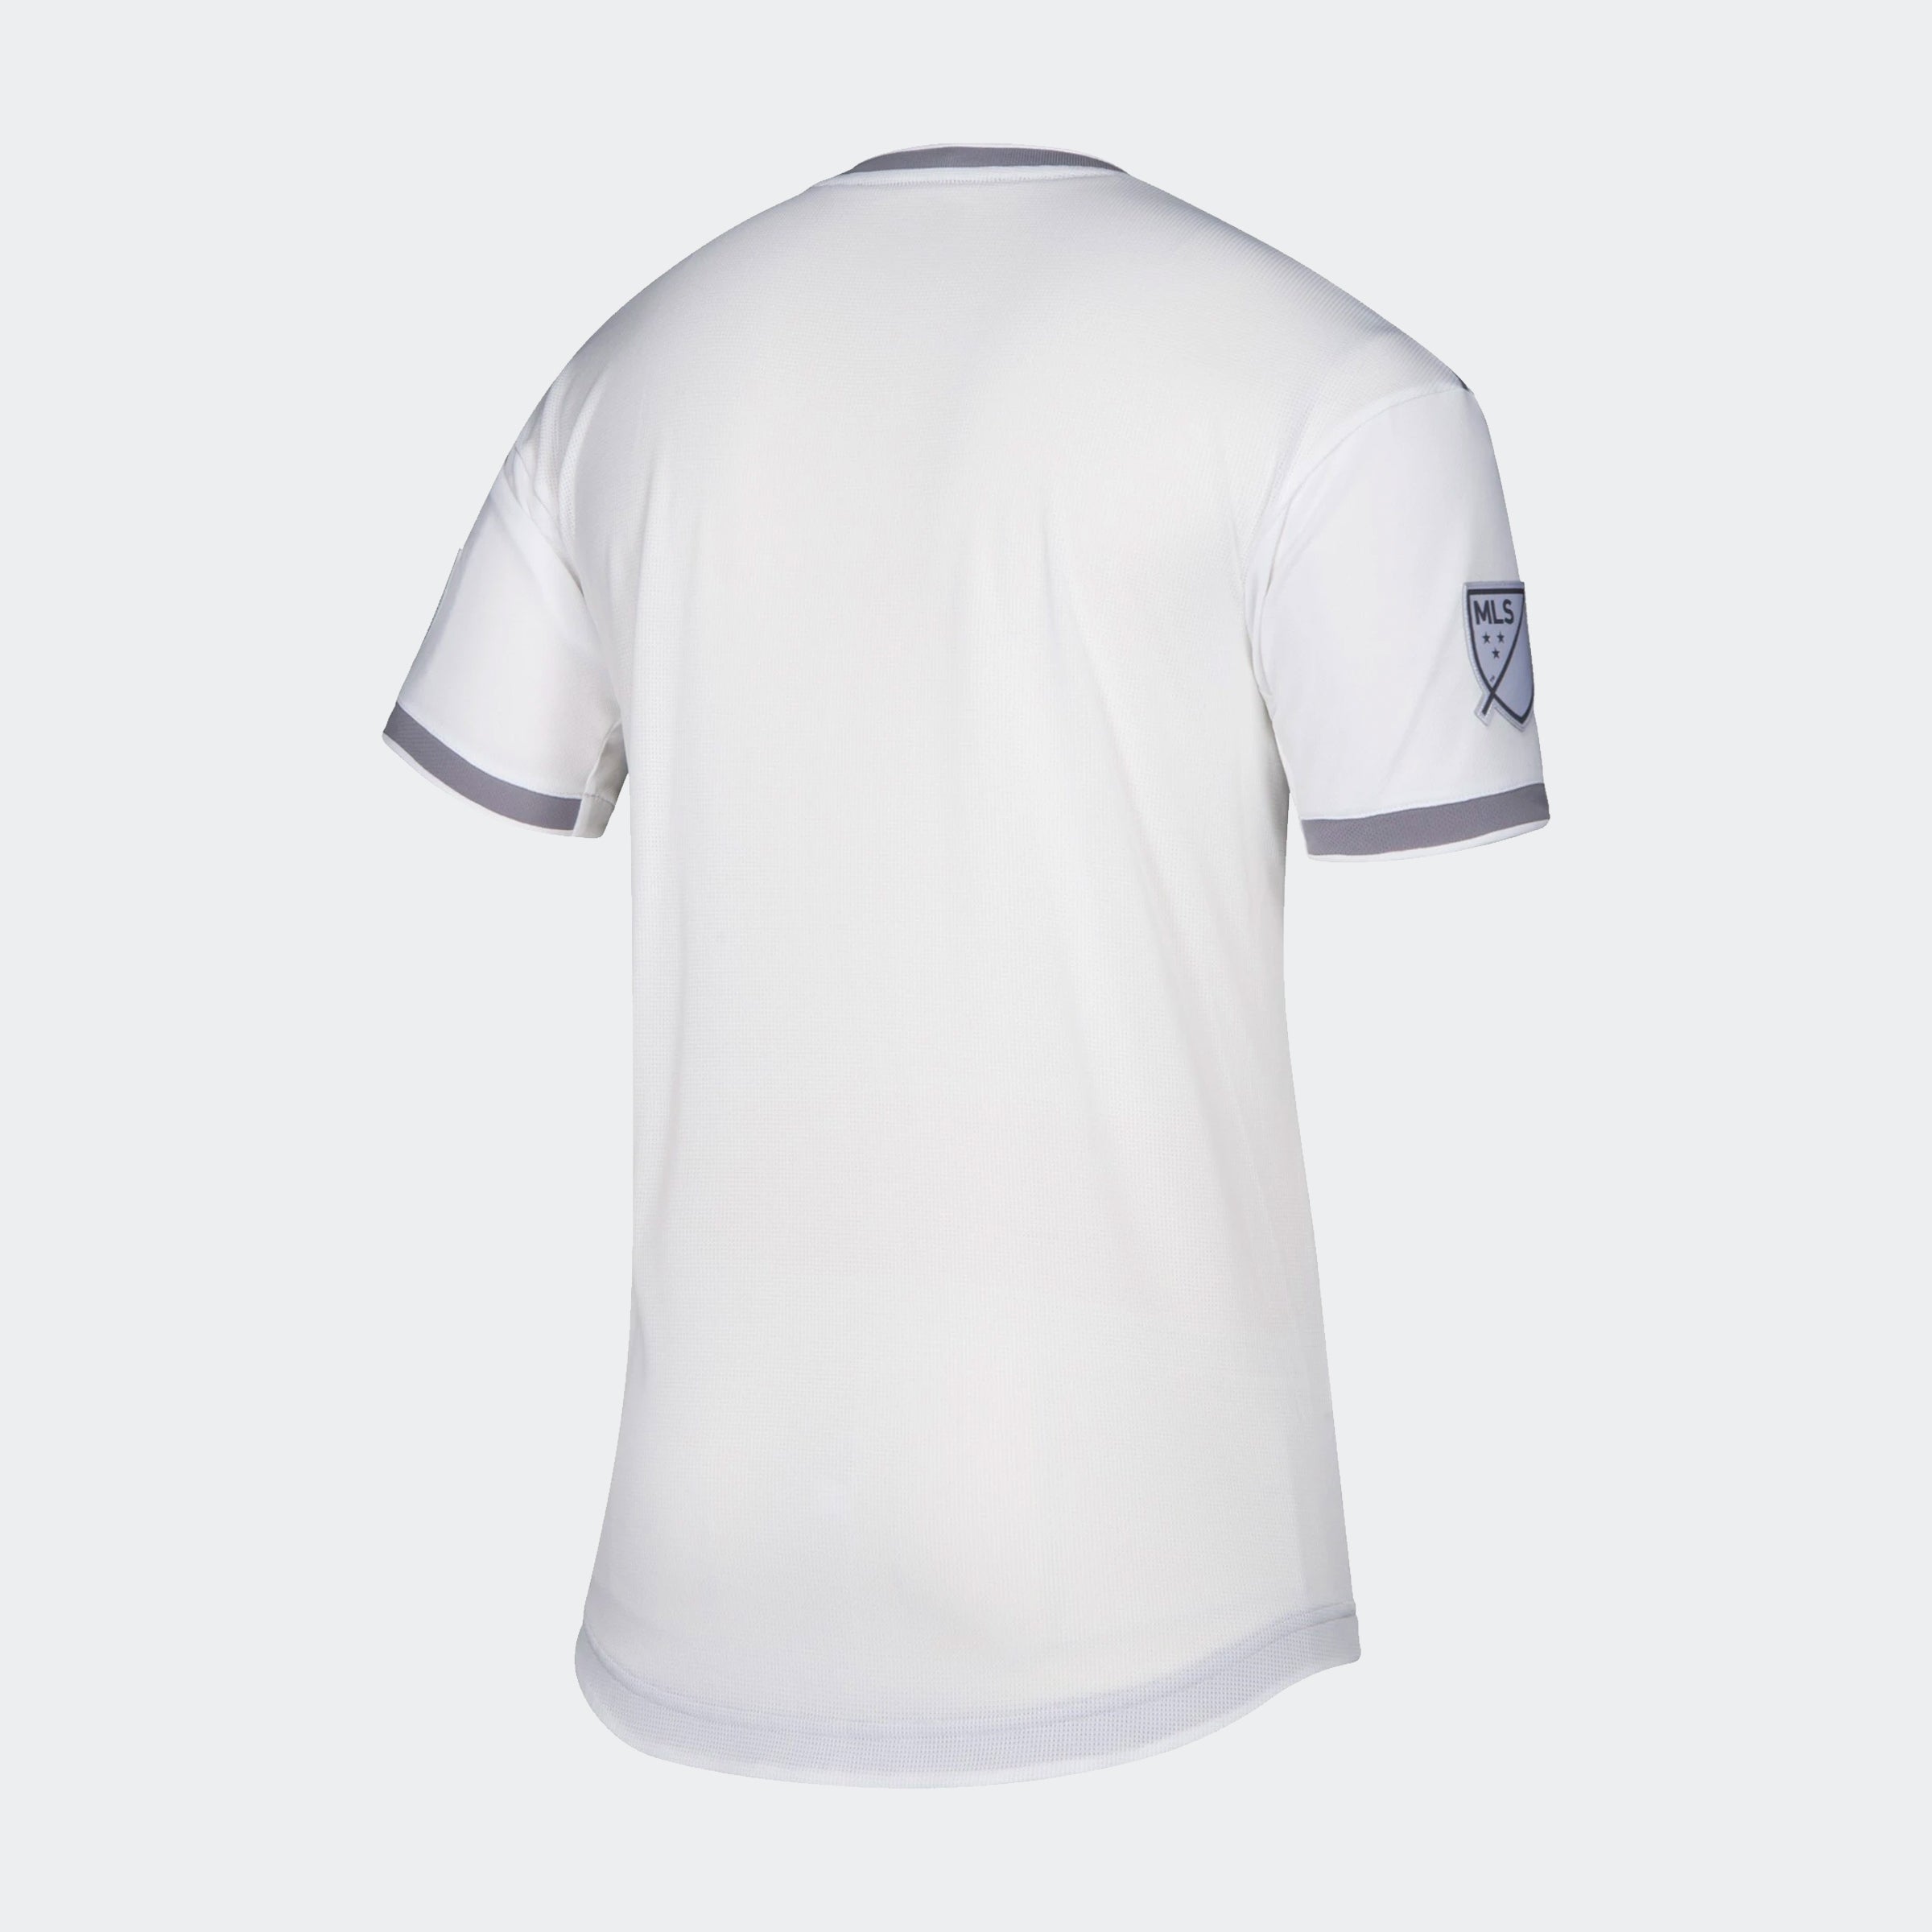 lafc jersey 2020 authentic